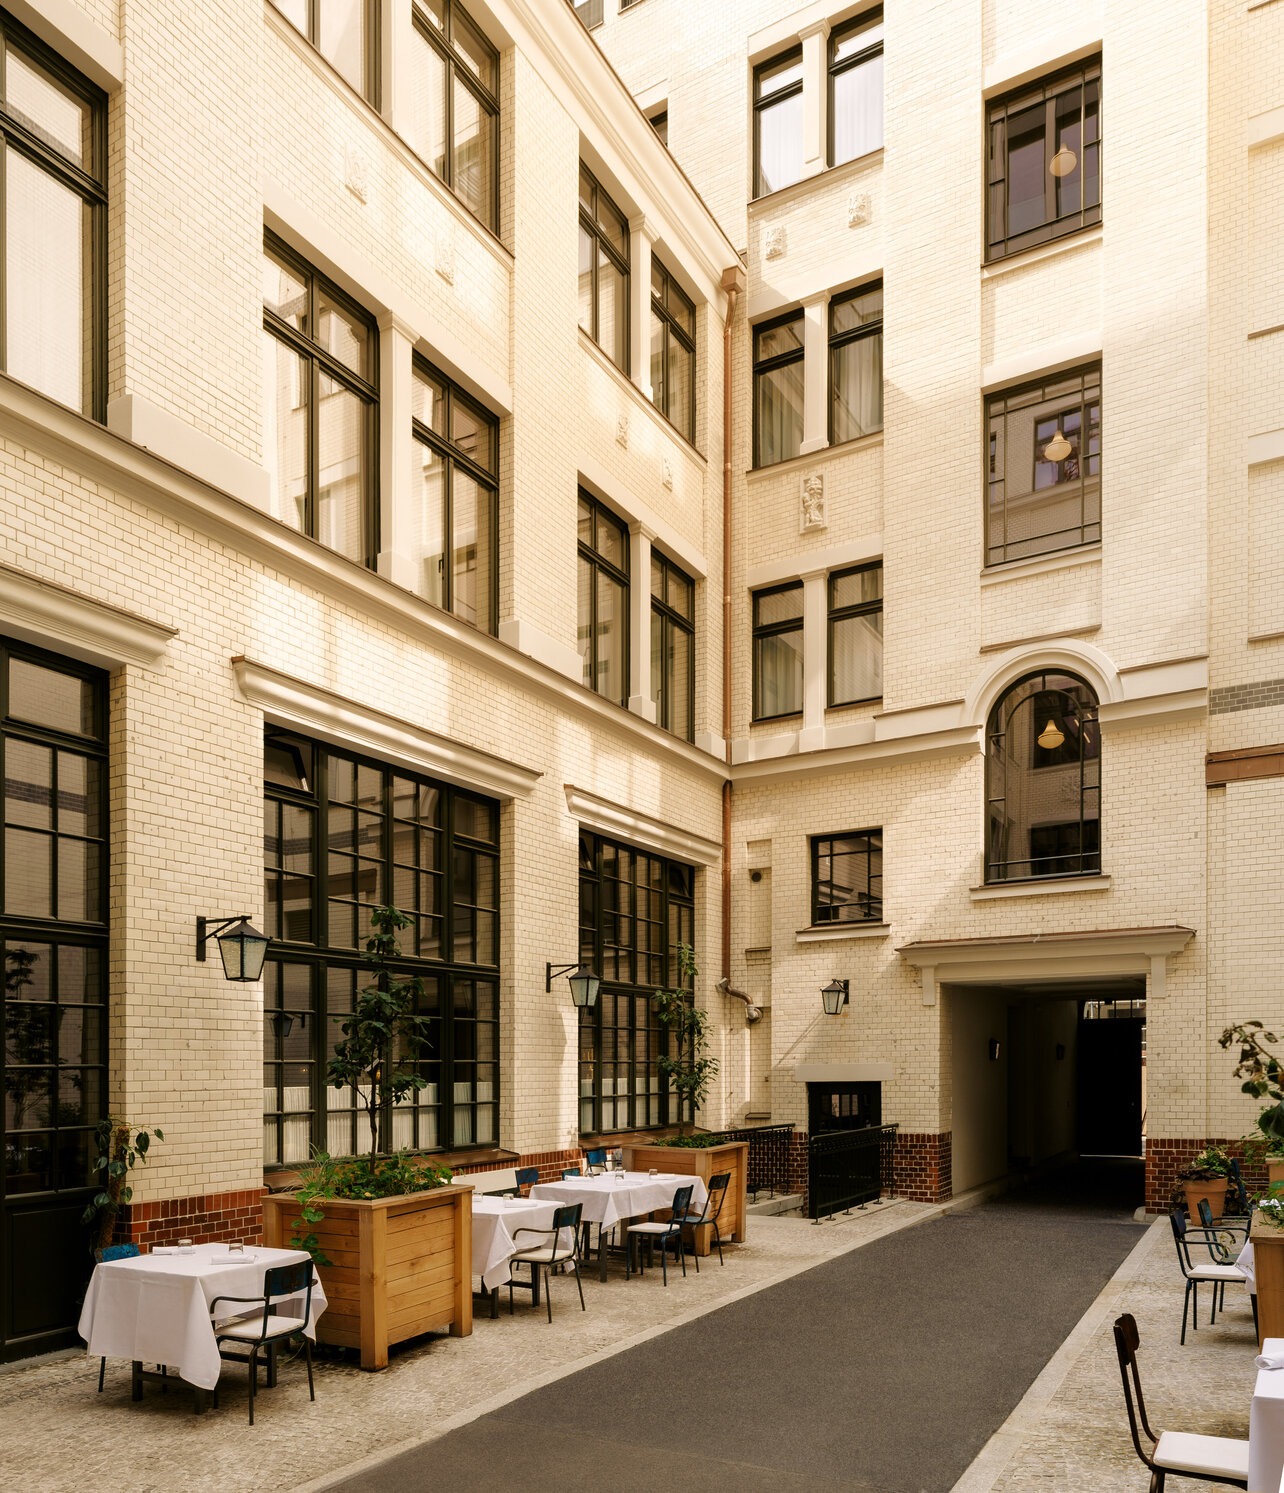 View of the charming historic inner courtyard of the Château Royal restaurant in Berlin Mitte with elegant white table settings